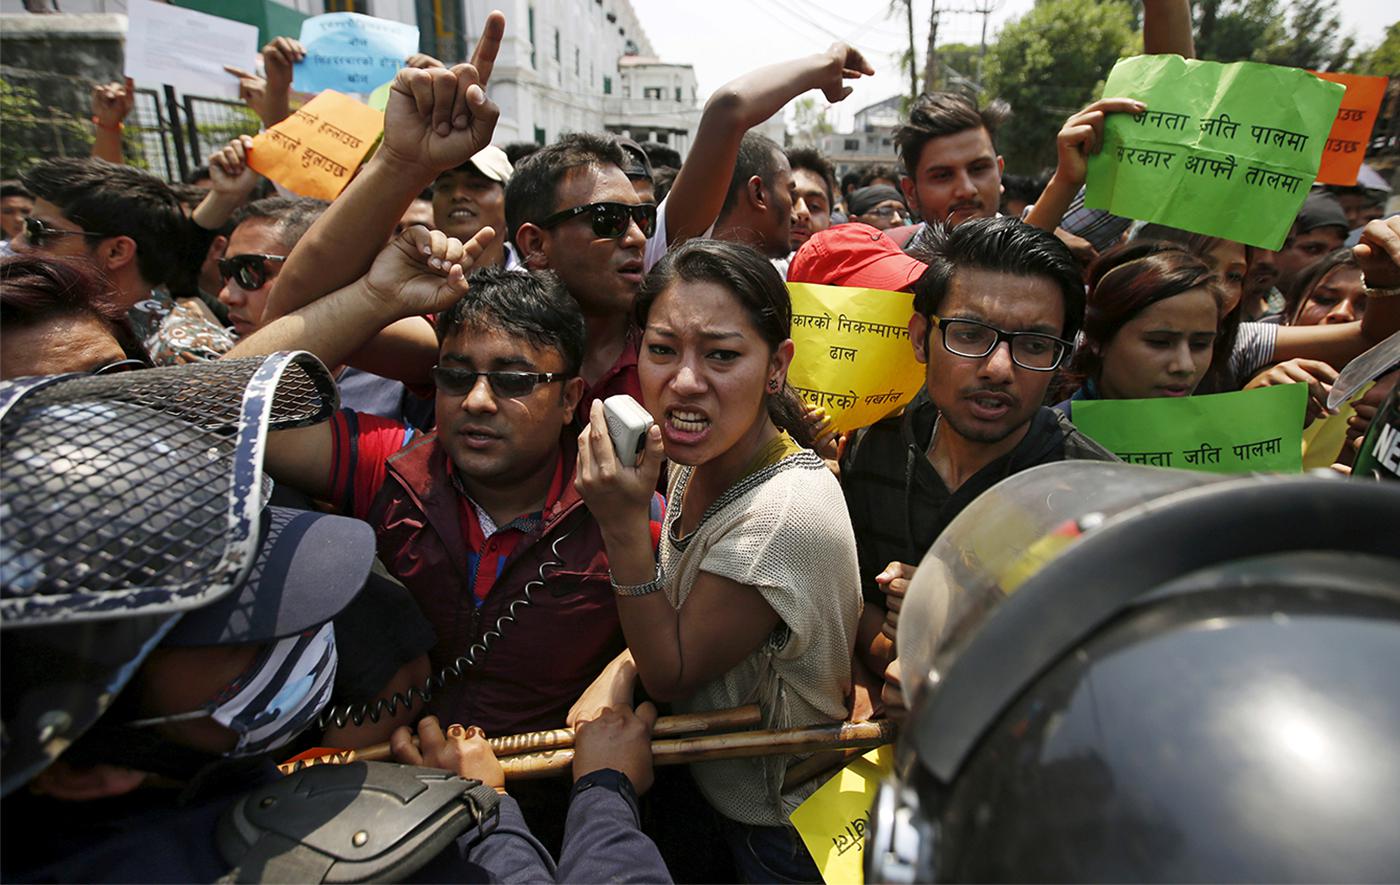 Nepalese police try to stop protesters marching towards the prime minister's office and other ministries, during a demonstration against delays on reconstruction and relief during the first anniversary of the 2015 earthquakes in Kathmandu, April 24, 2016.